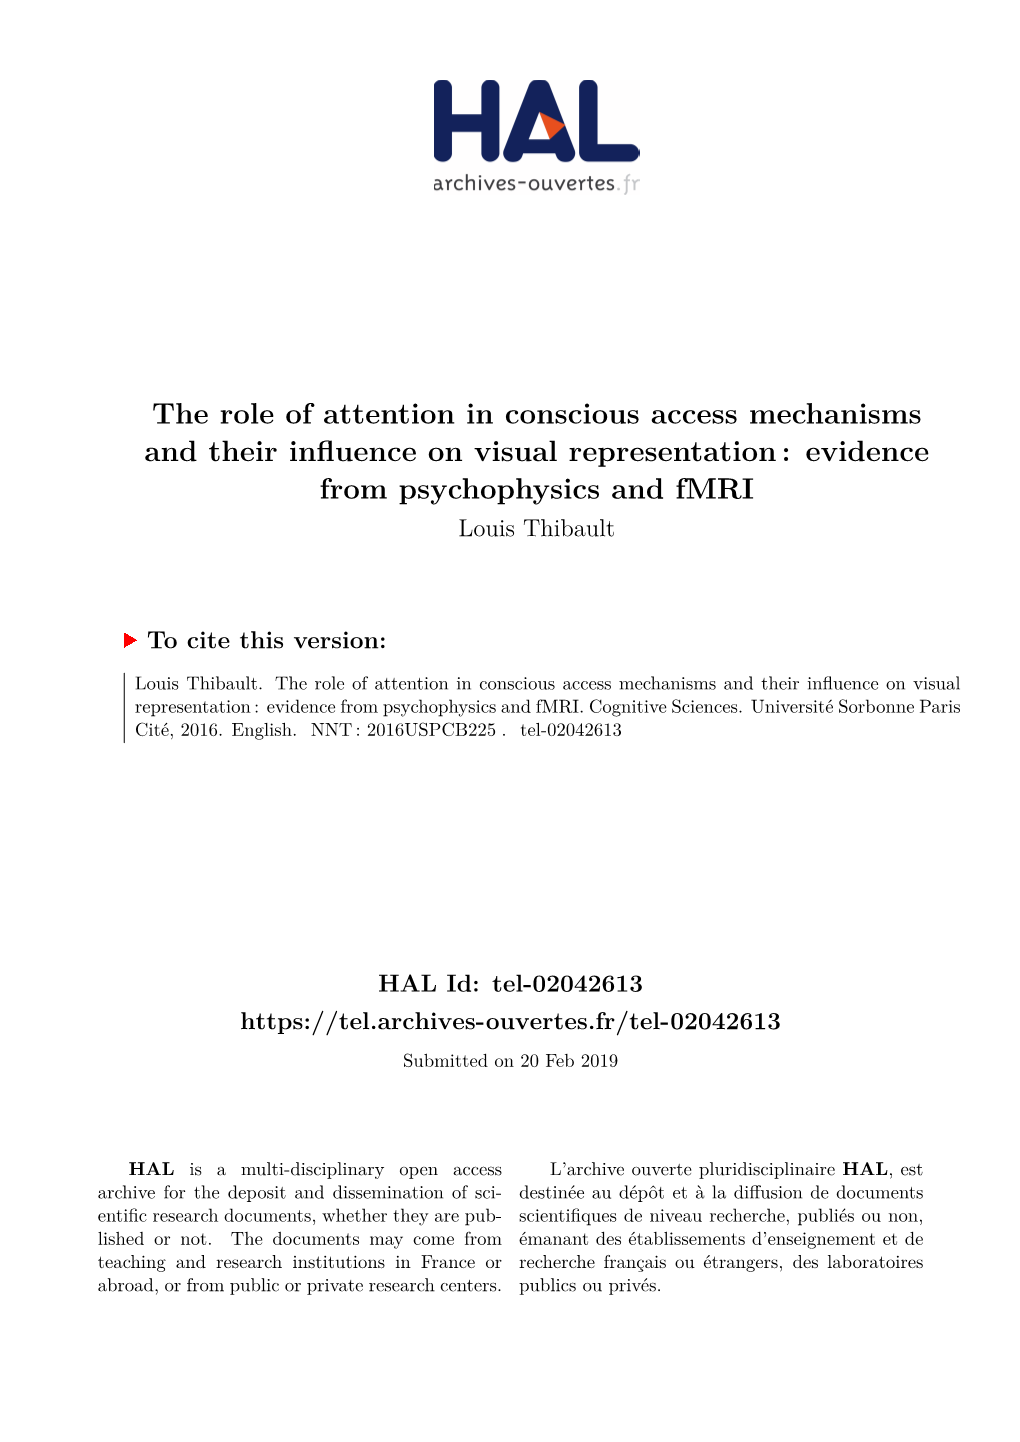 The Role of Attention in Conscious Access Mechanisms and Their Influence on Visual Representation : Evidence from Psychophysics and Fmri Louis Thibault